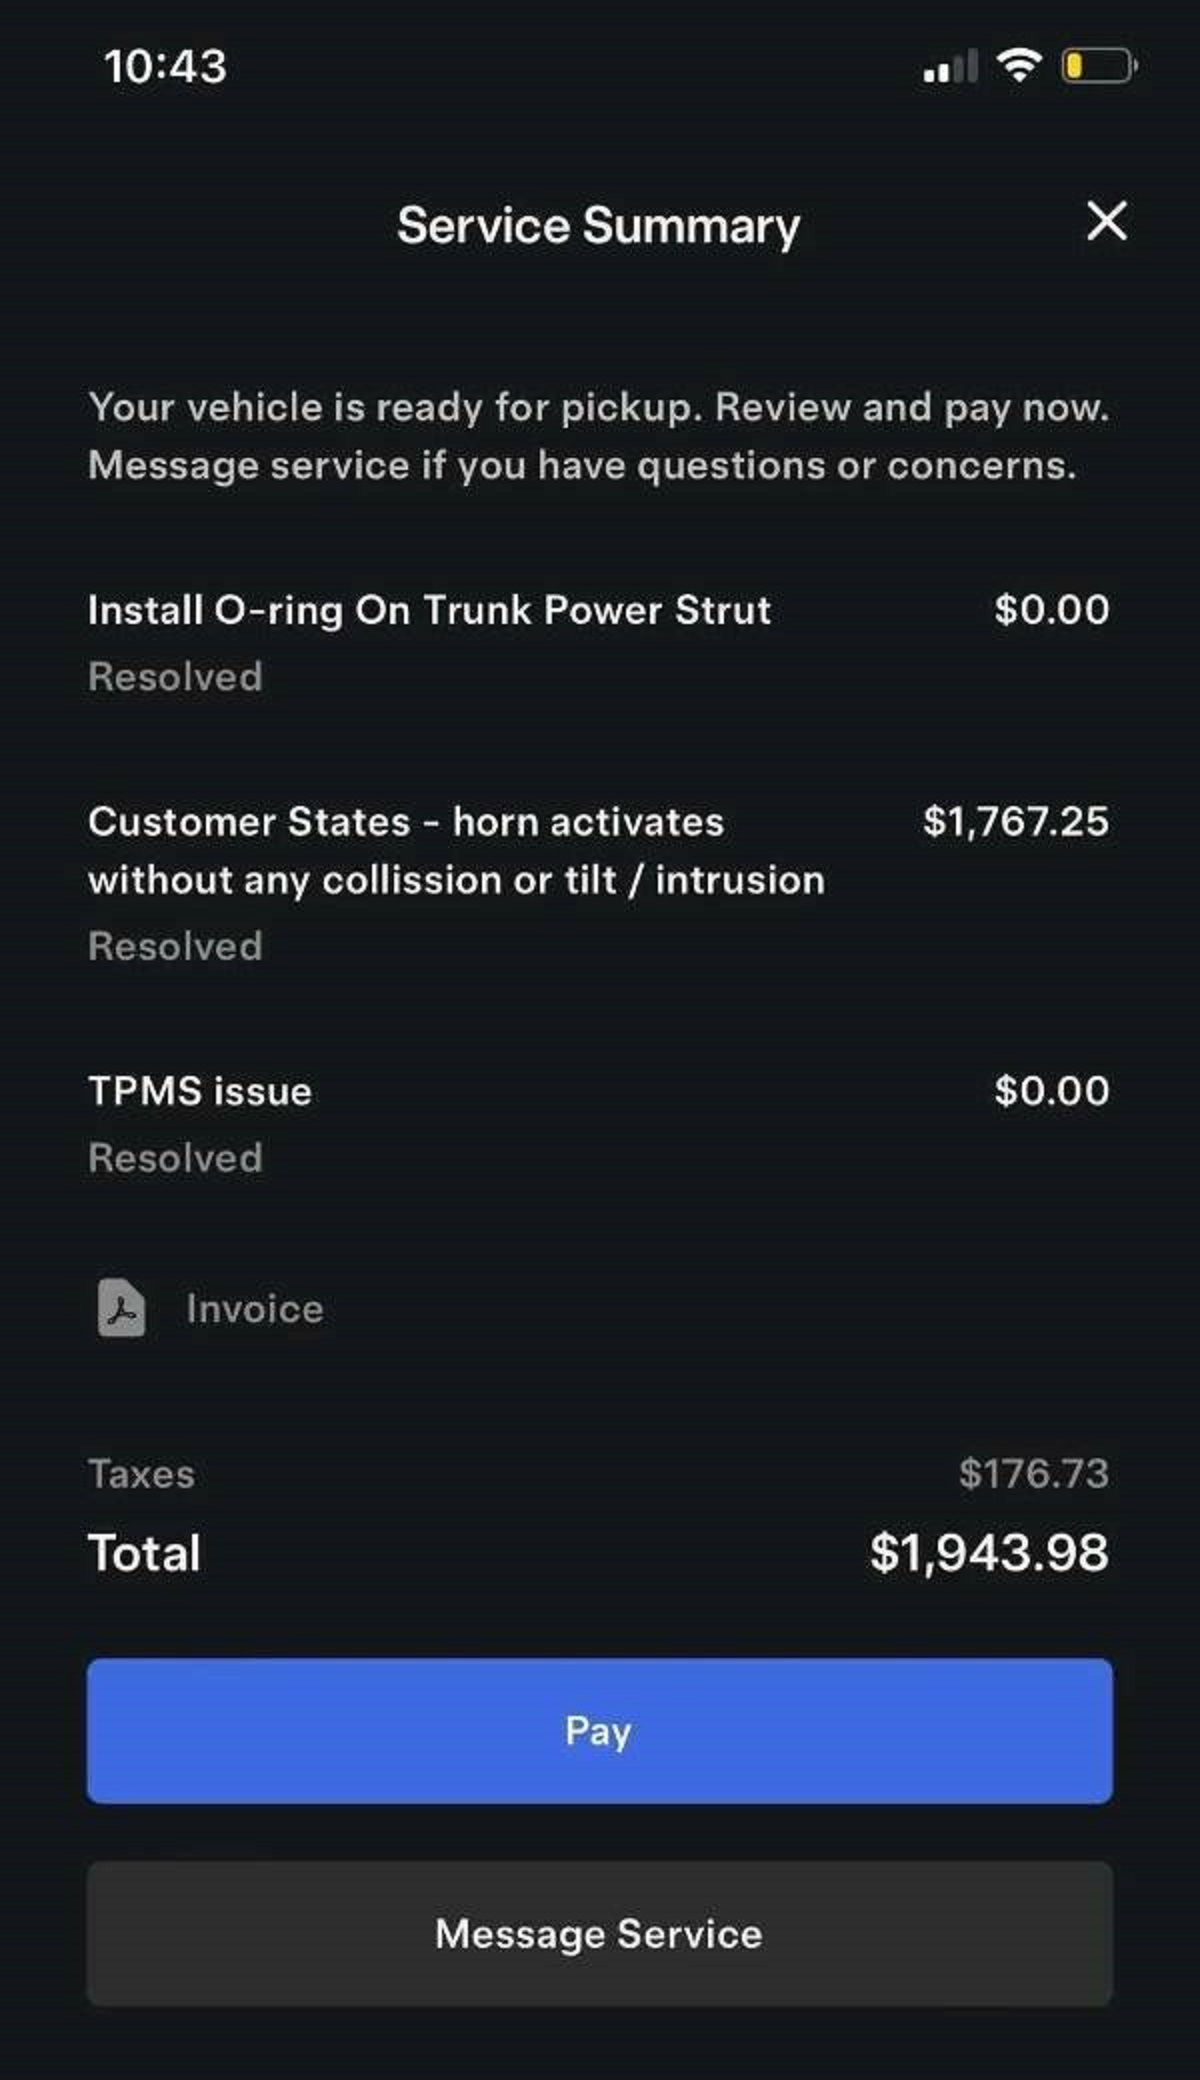 “My Tesla’s Horn Went off at 4AM for Over 20 Minutes Uncontrollably, $2000 Fix From Tesla.”